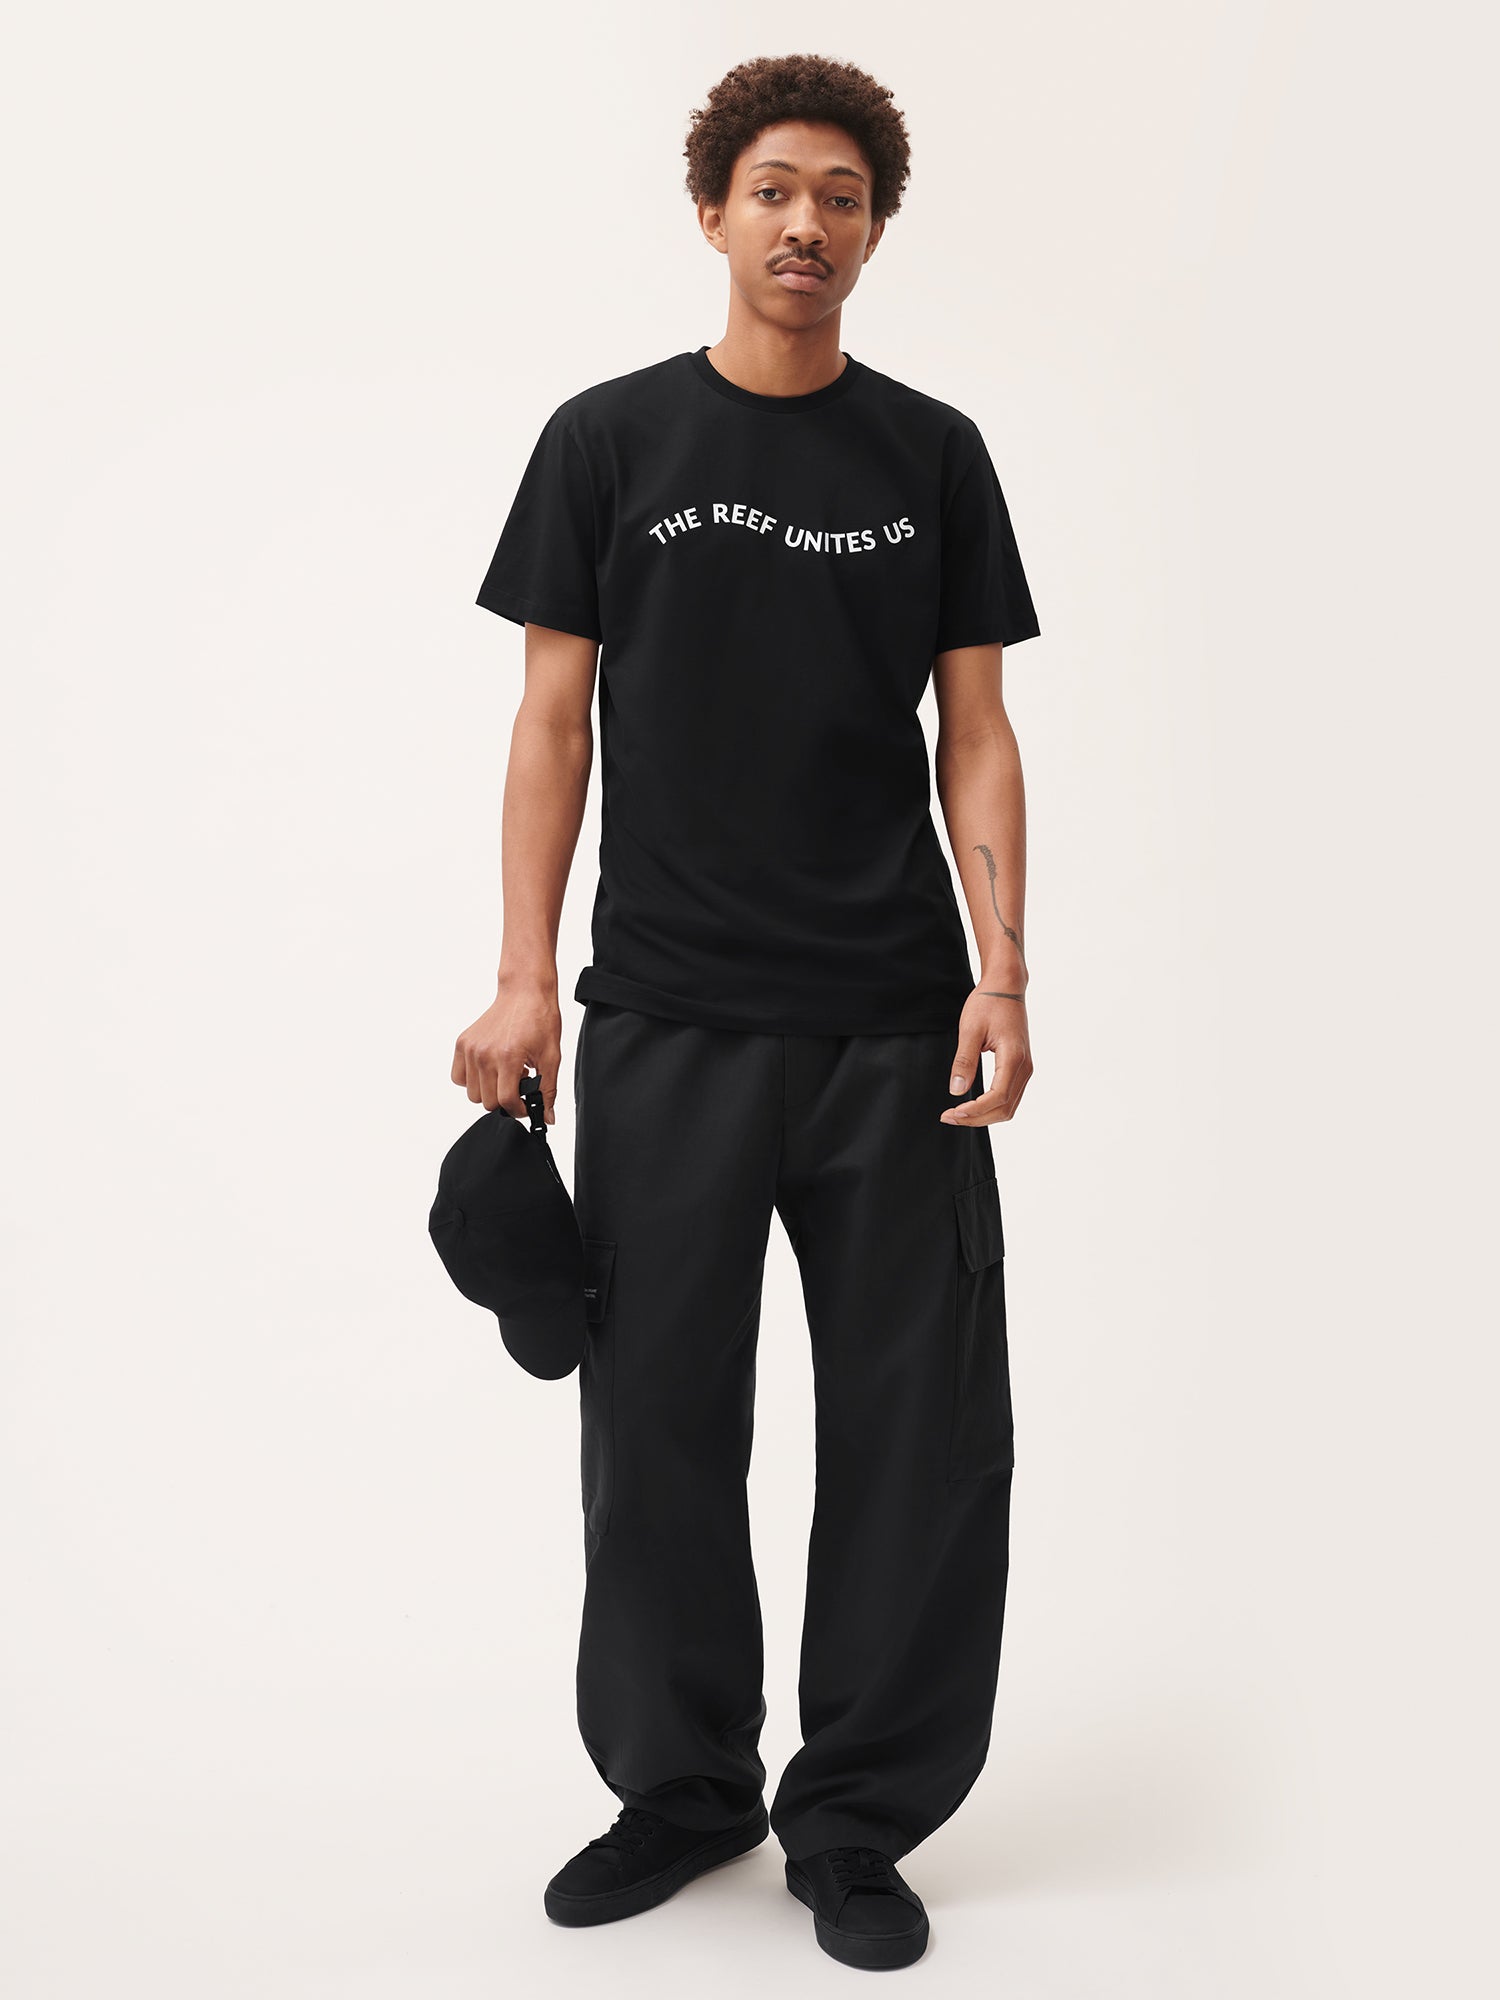 Coral_Gardeners_Midweight_T-Shirt_Black_male-3